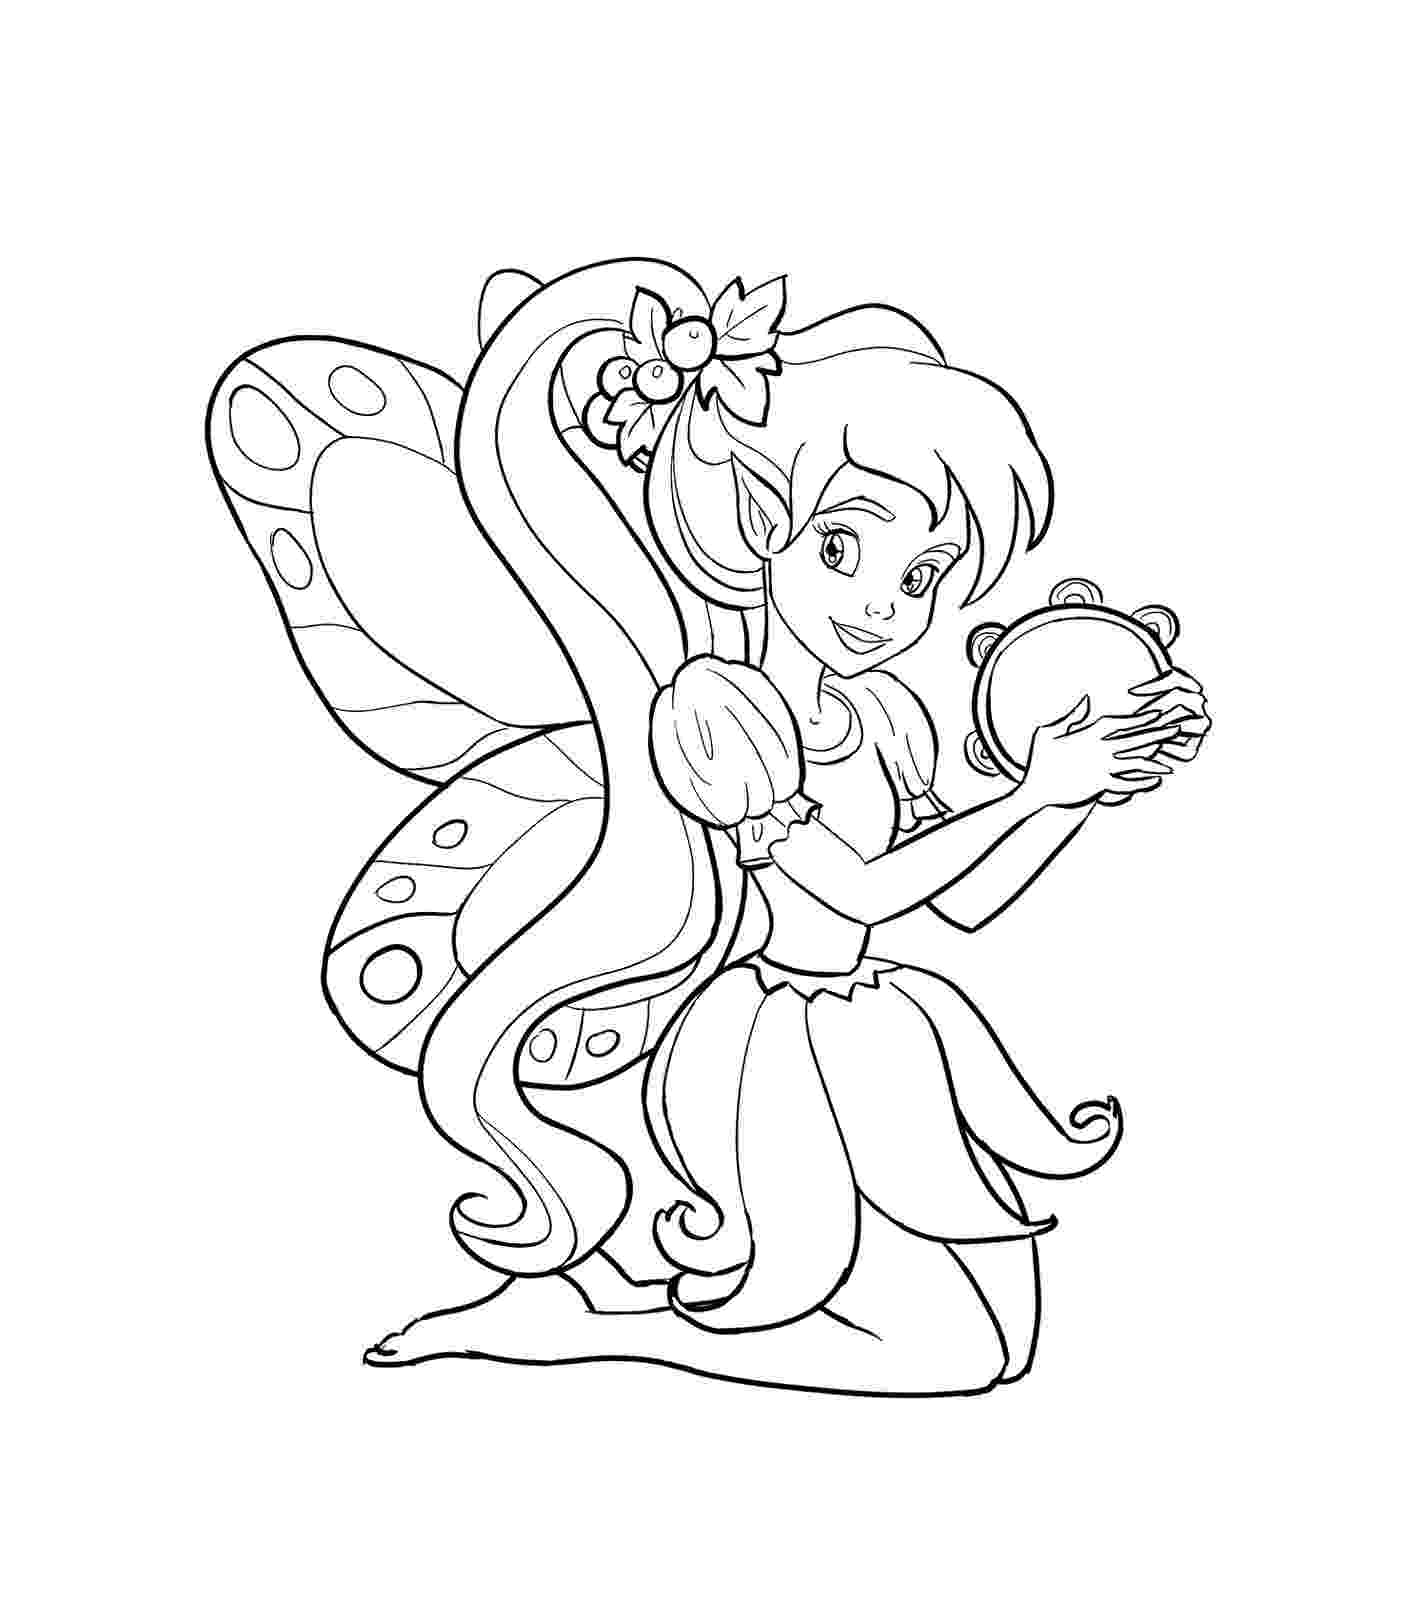 fairy color pages free printable fairy coloring pages for kids fairy color pages 